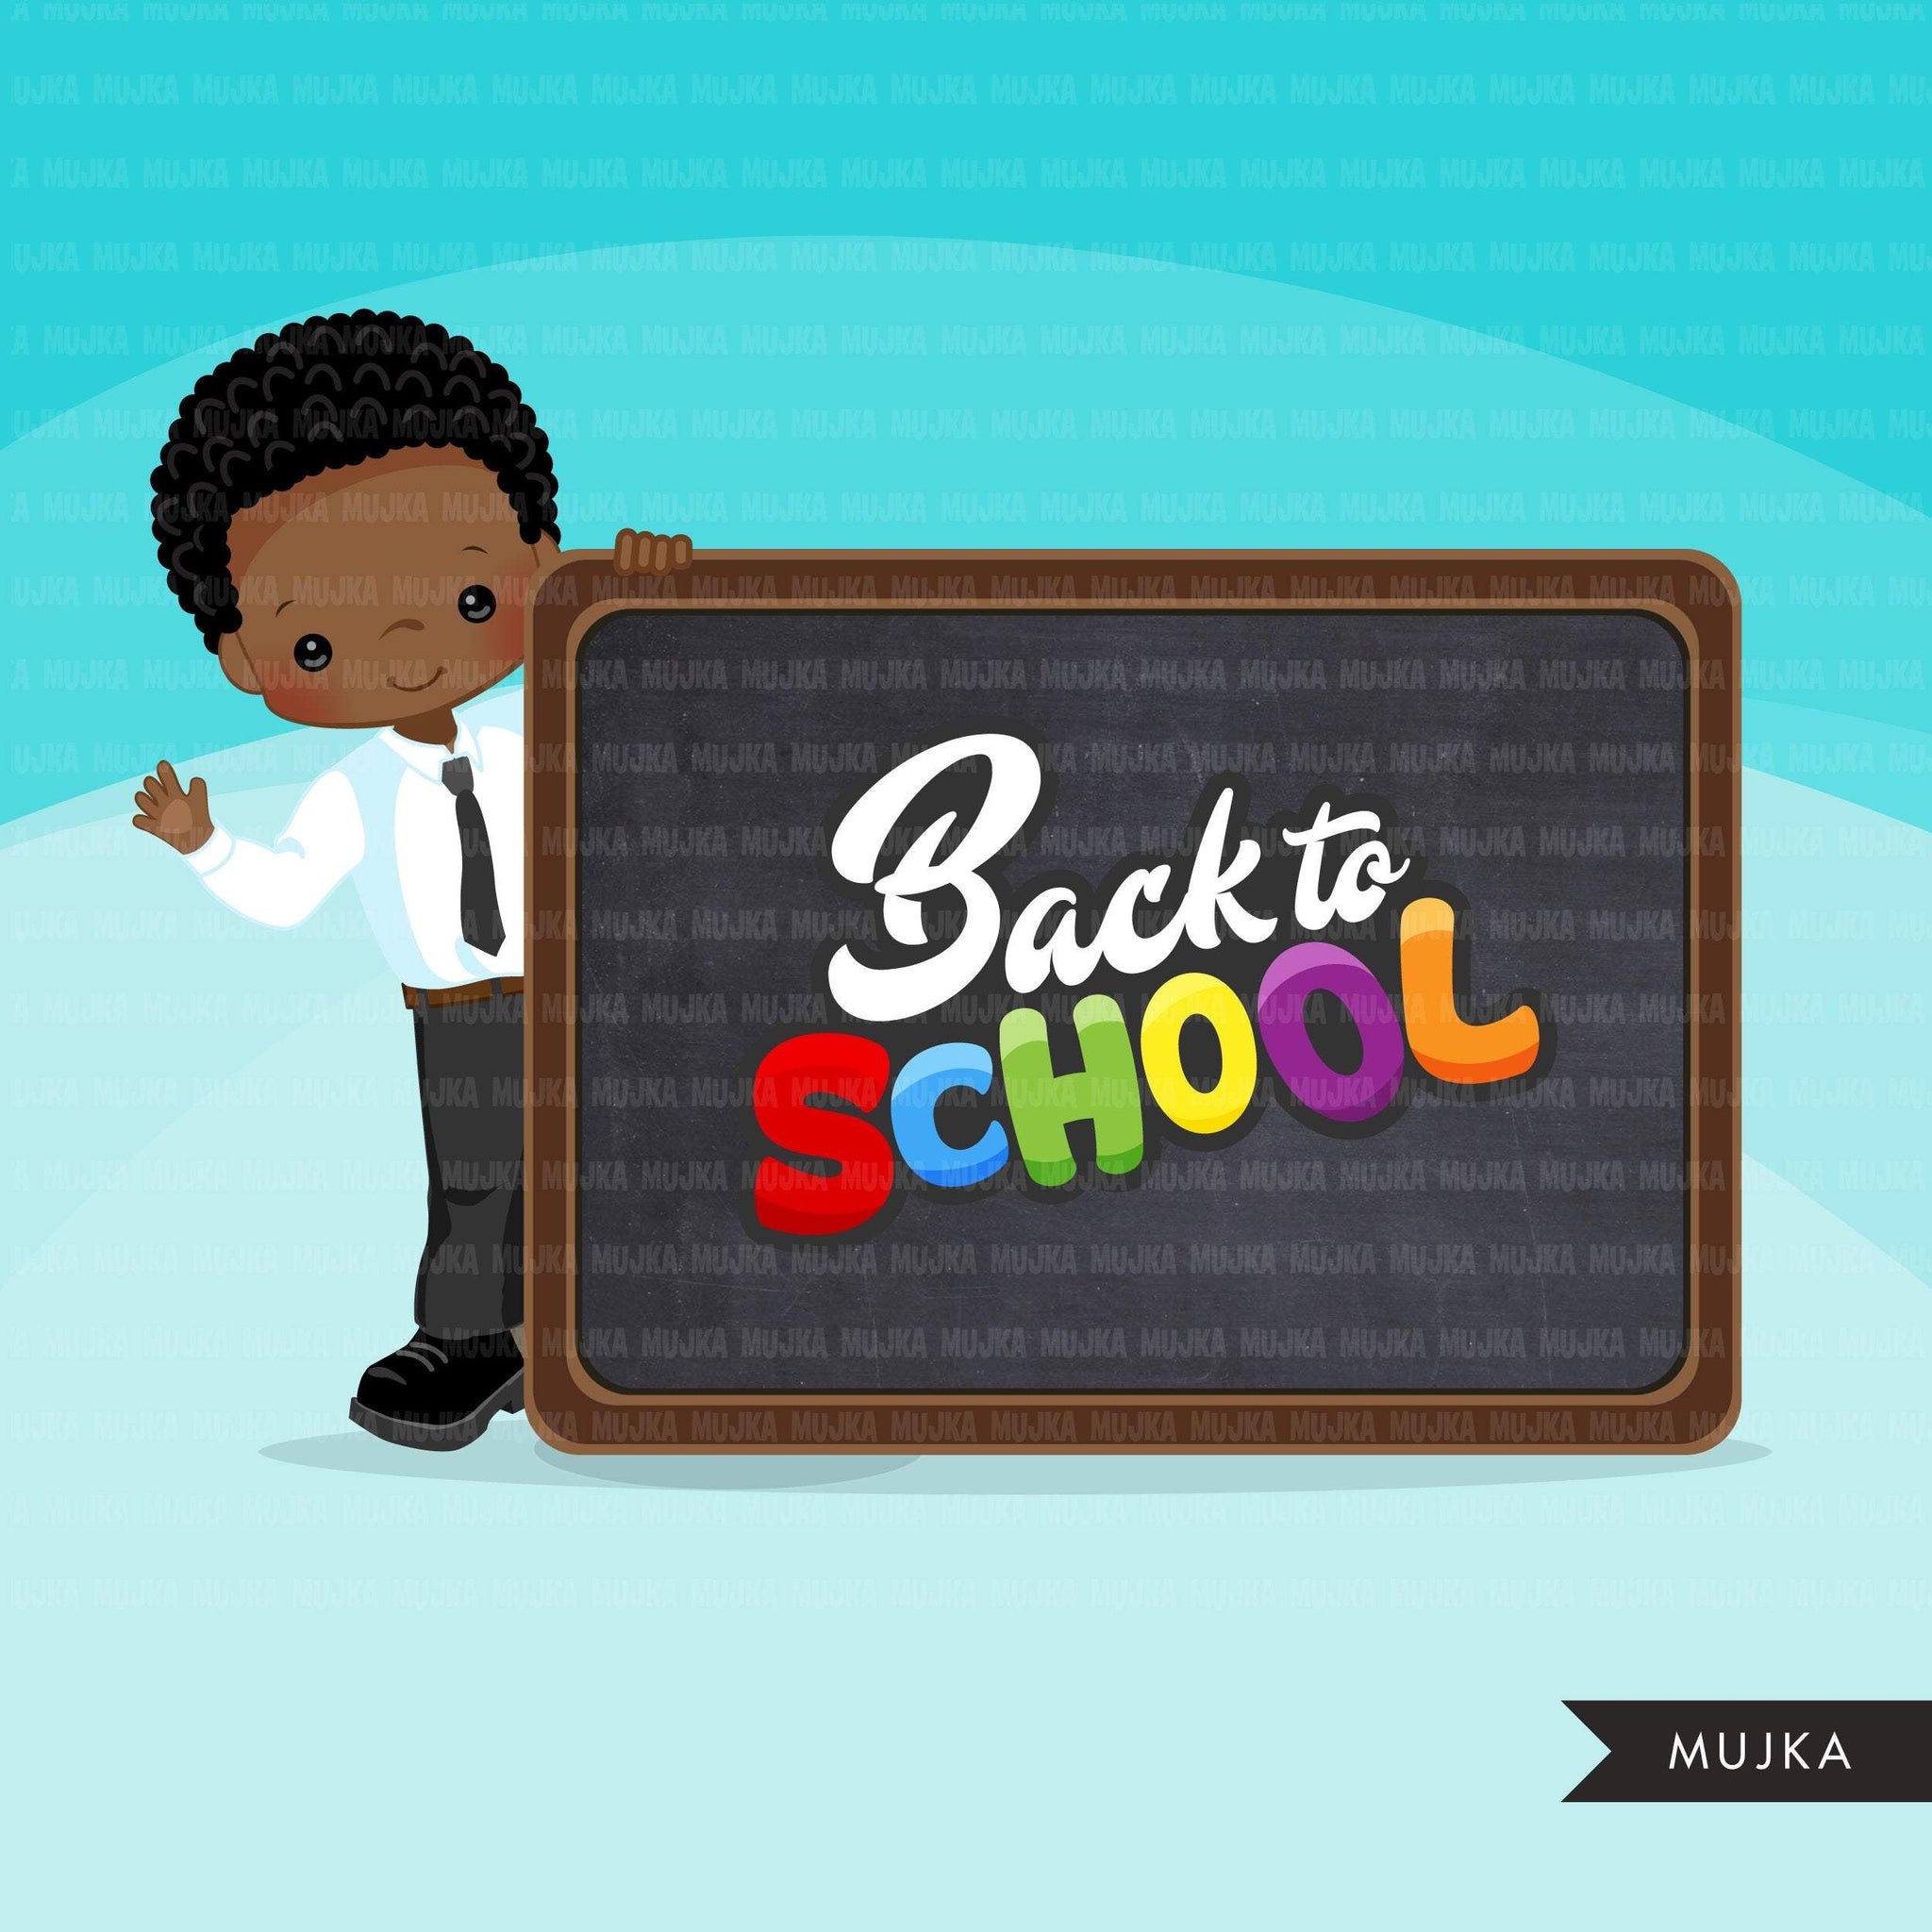 School backpack- Digital back to school clipart. ai eps png pdf and jpg 300  DPI files included, digital files instant download.